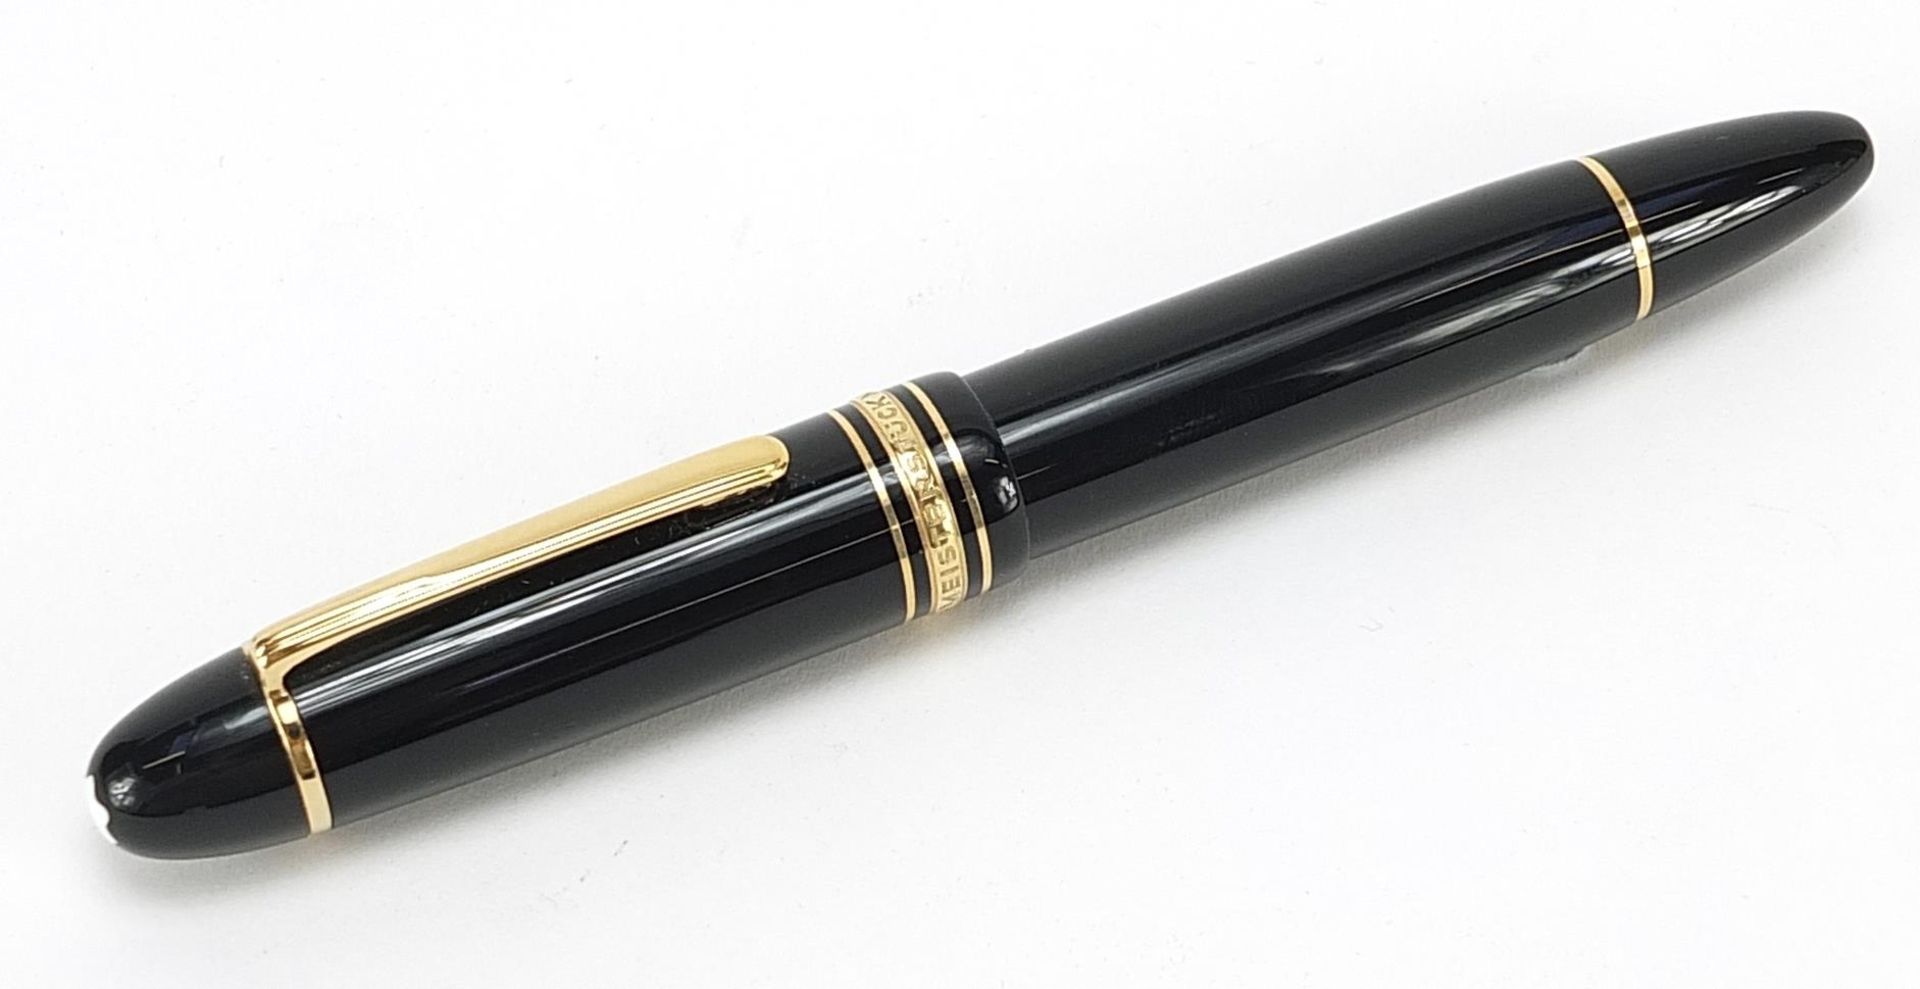 Mont Blanc Meisterstuck no 149 fountain pen and 14k gold nib and accessories including case and ink - Image 4 of 6